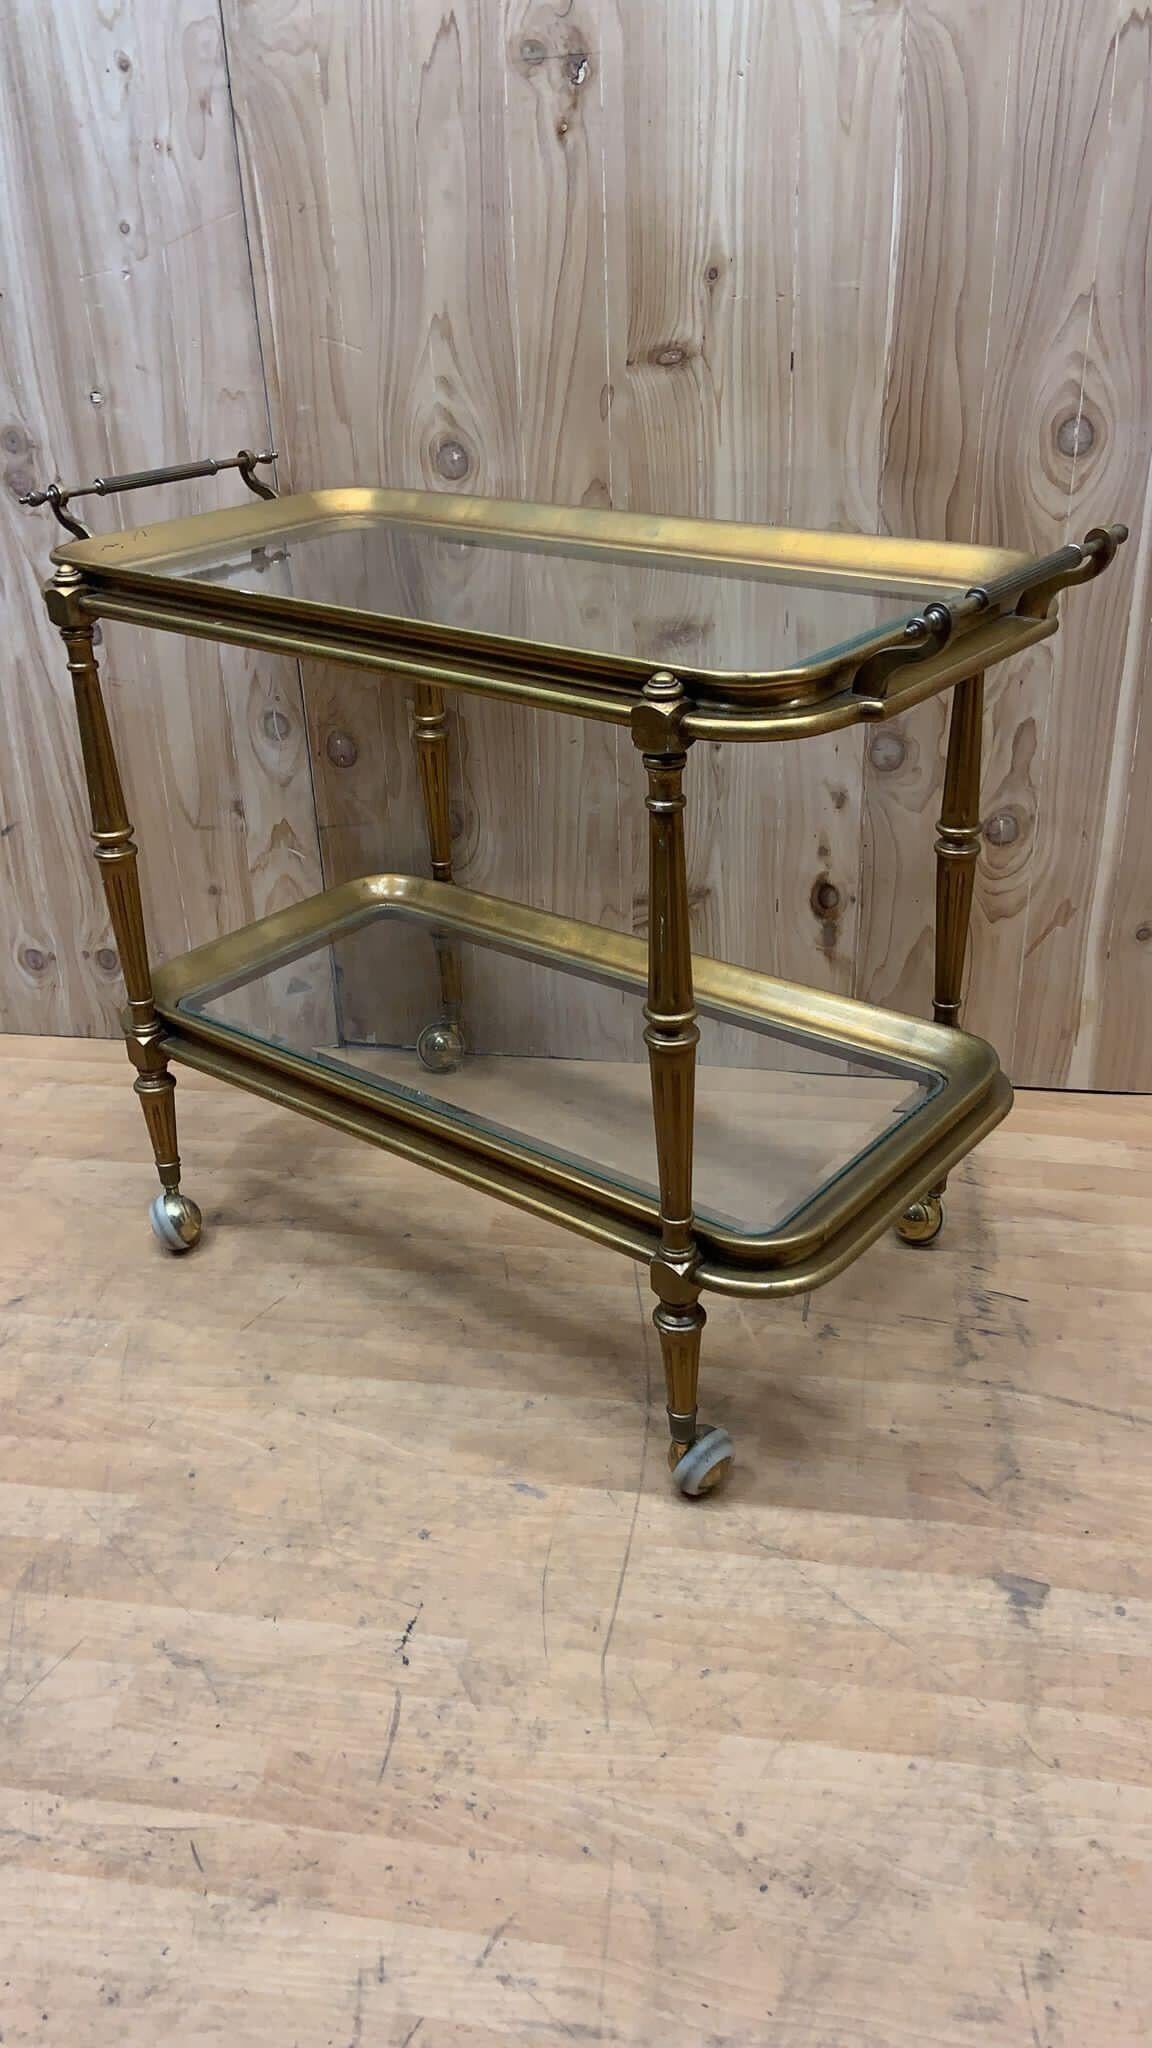 Vintage Brass Two Tier Bar Cart

Vintage modern brass bar/tea cart with two tier glass shelves.

circa: 1970

Dimensions:

H: 32